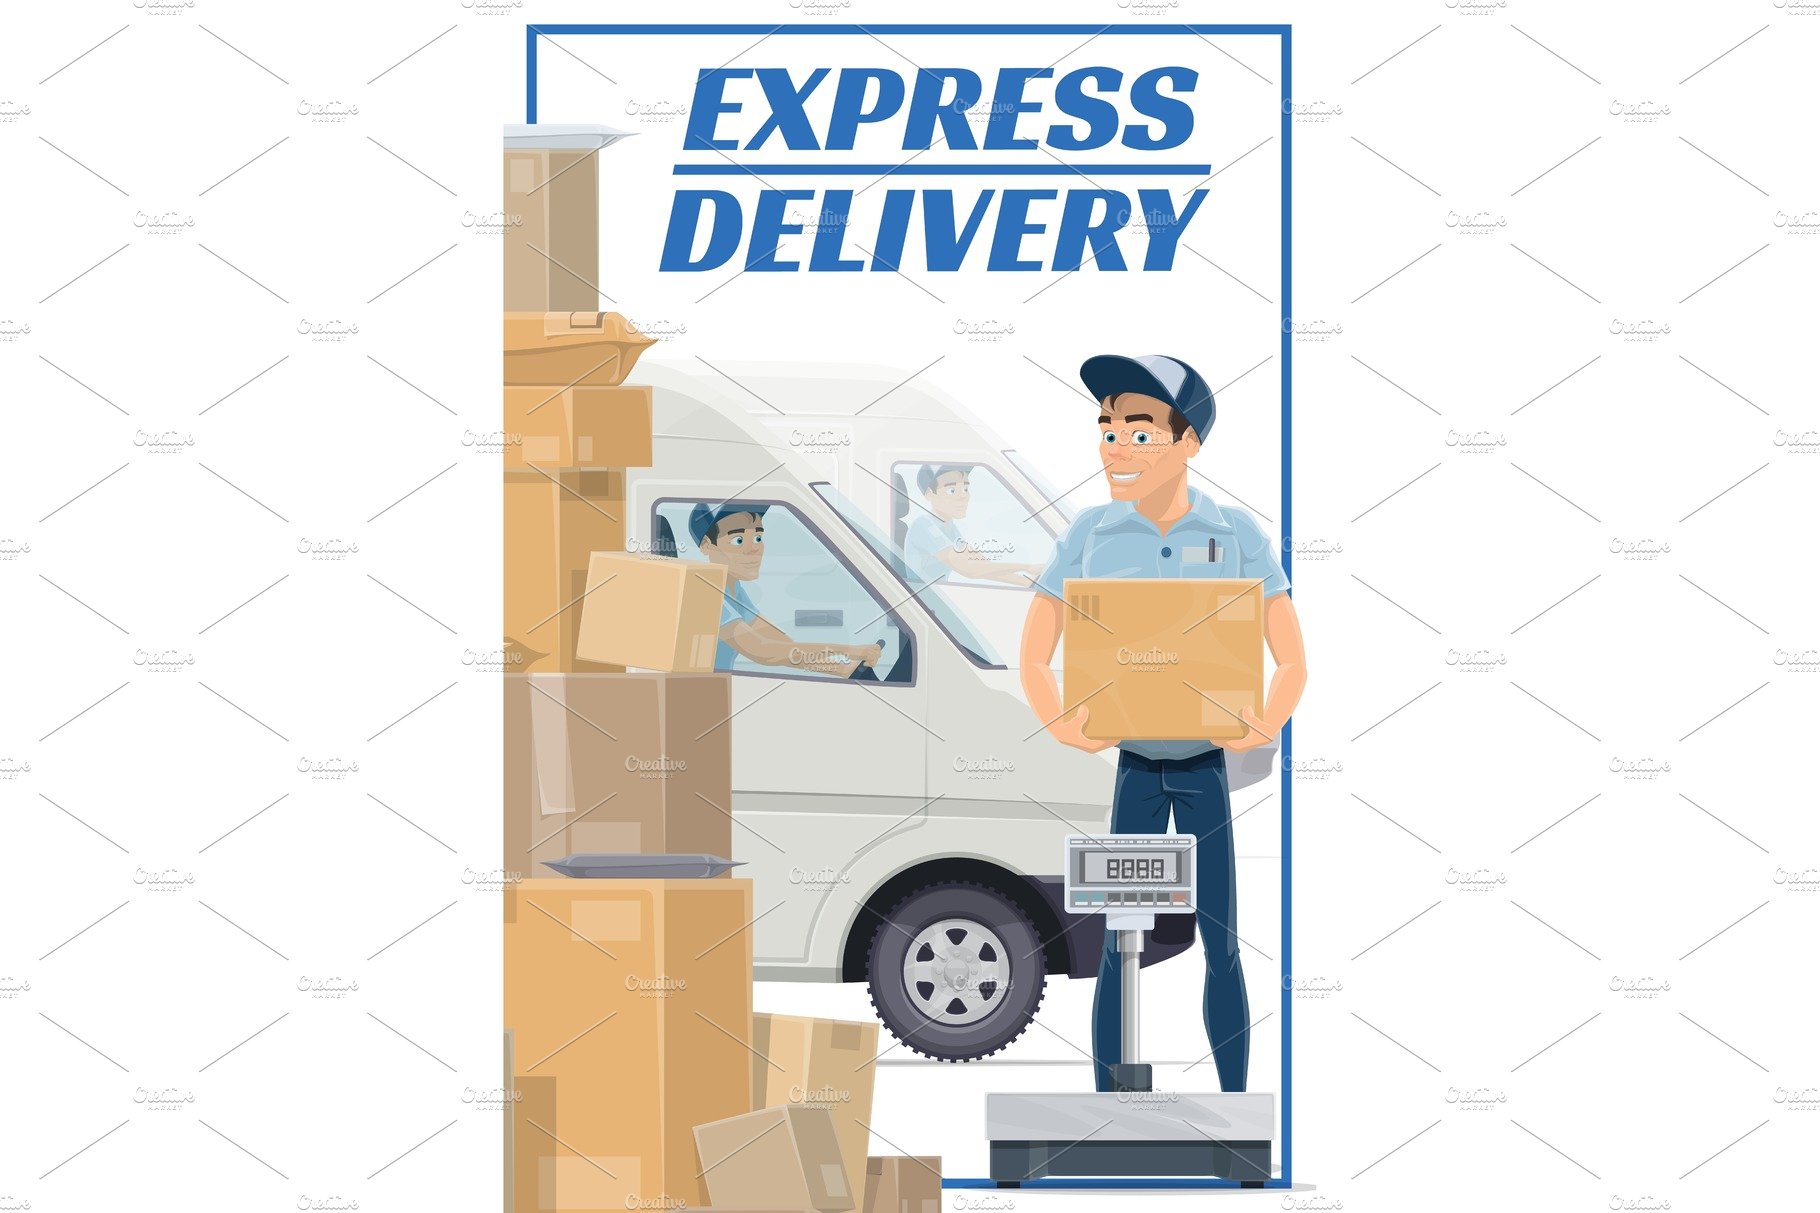 Mail post, express delivery courier cover image.